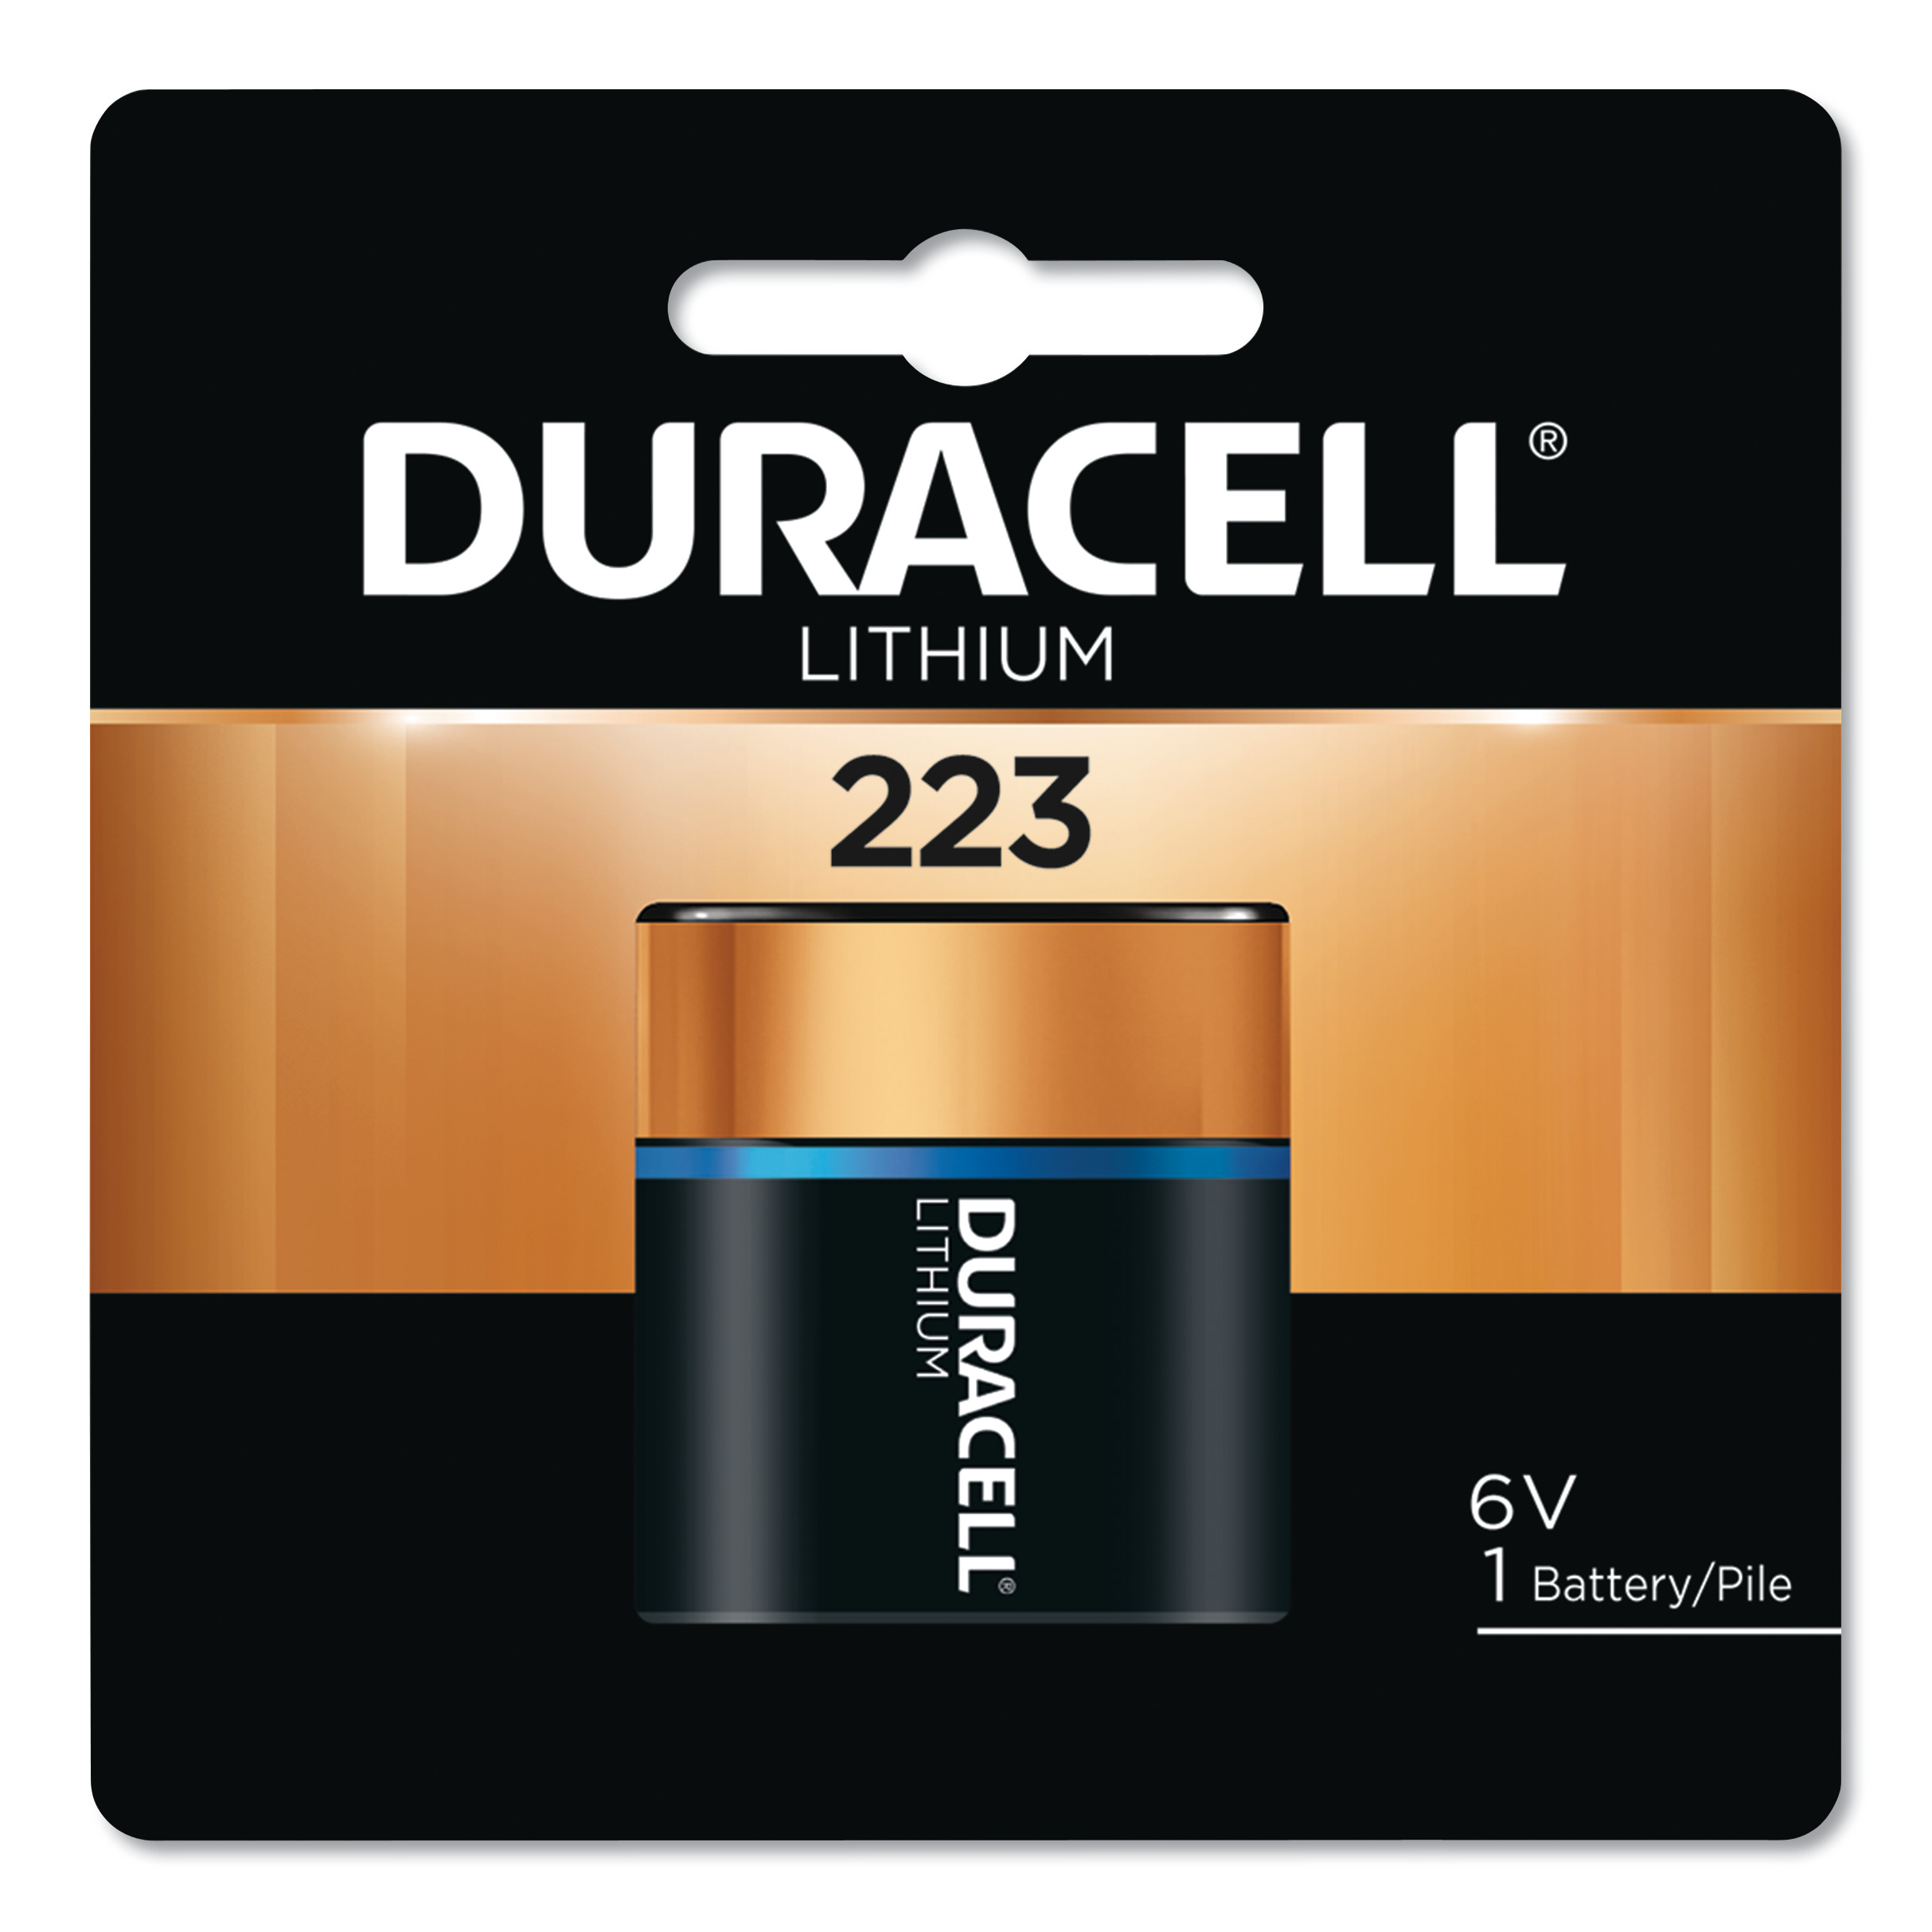  Duracell DL223ABPK Specialty High-Power Lithium Battery, 223, 6V (DURDL223ABPK) 